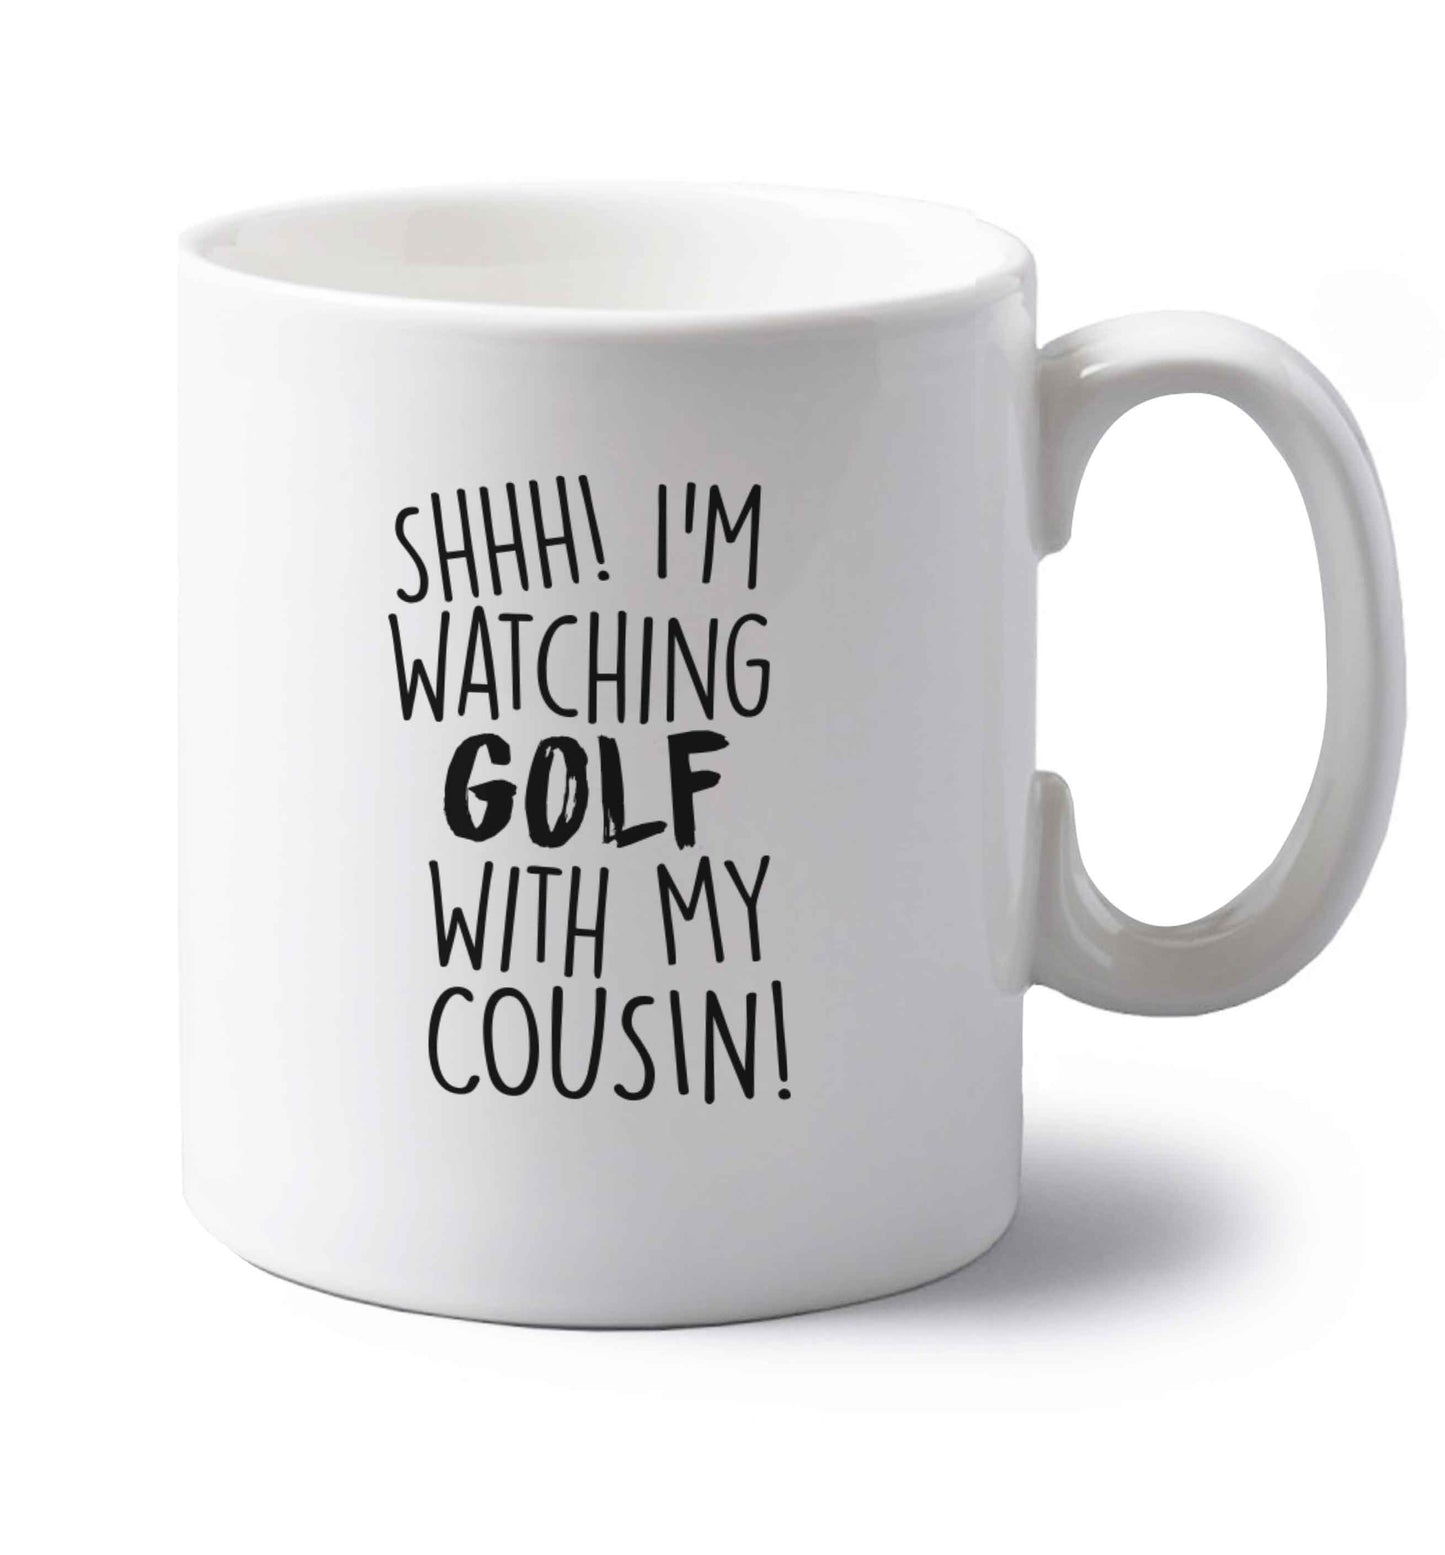 Shh I'm watching golf with my cousin left handed white ceramic mug 